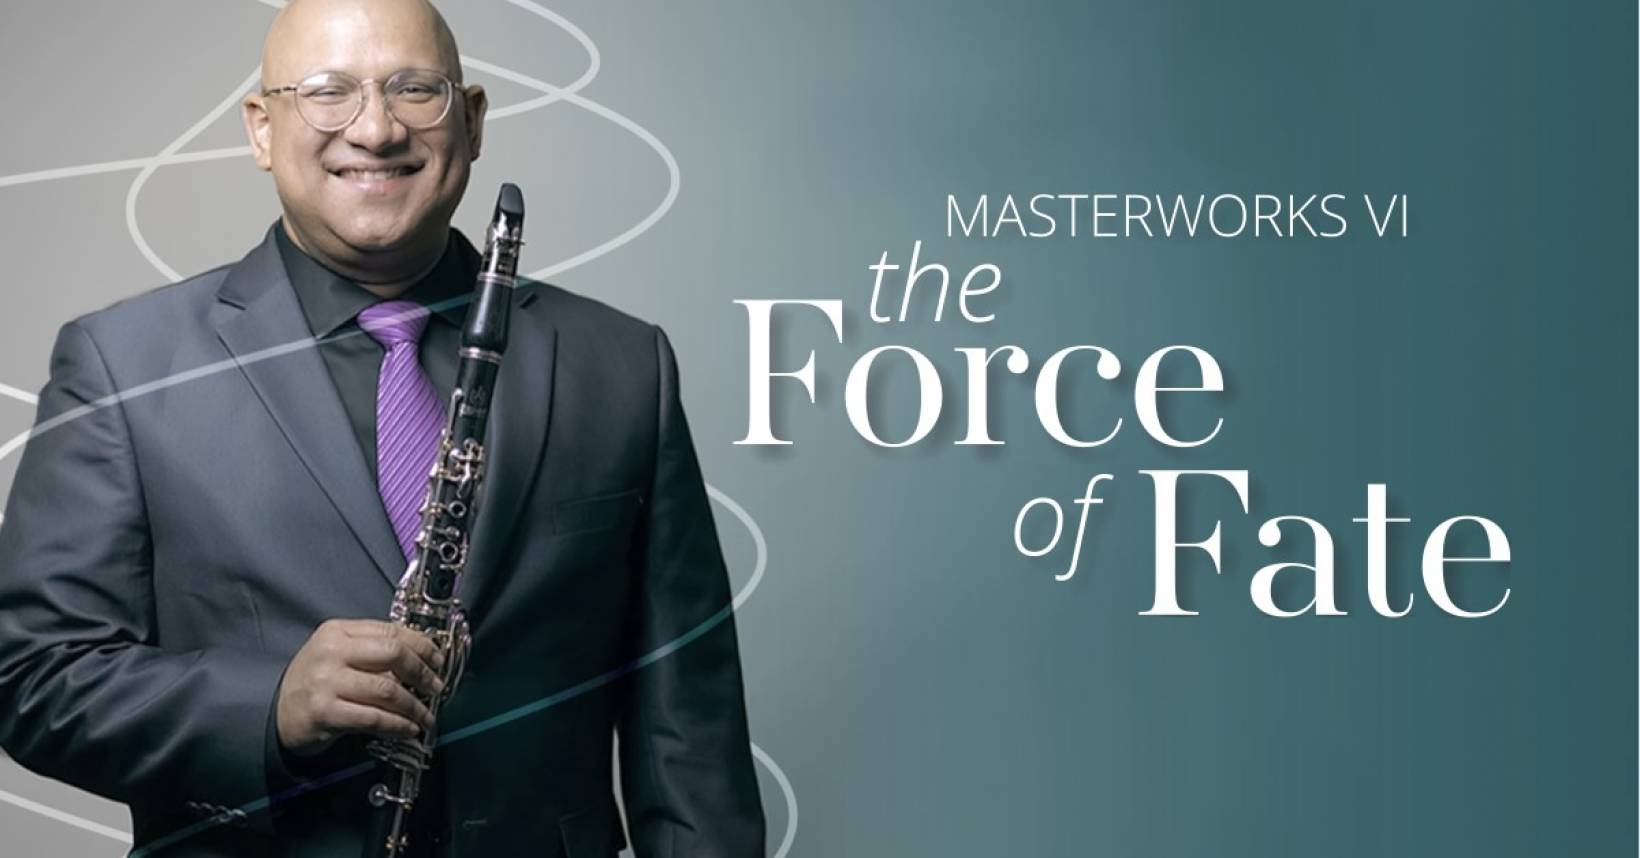 QCSO Masterworks VI: The Force of Fate